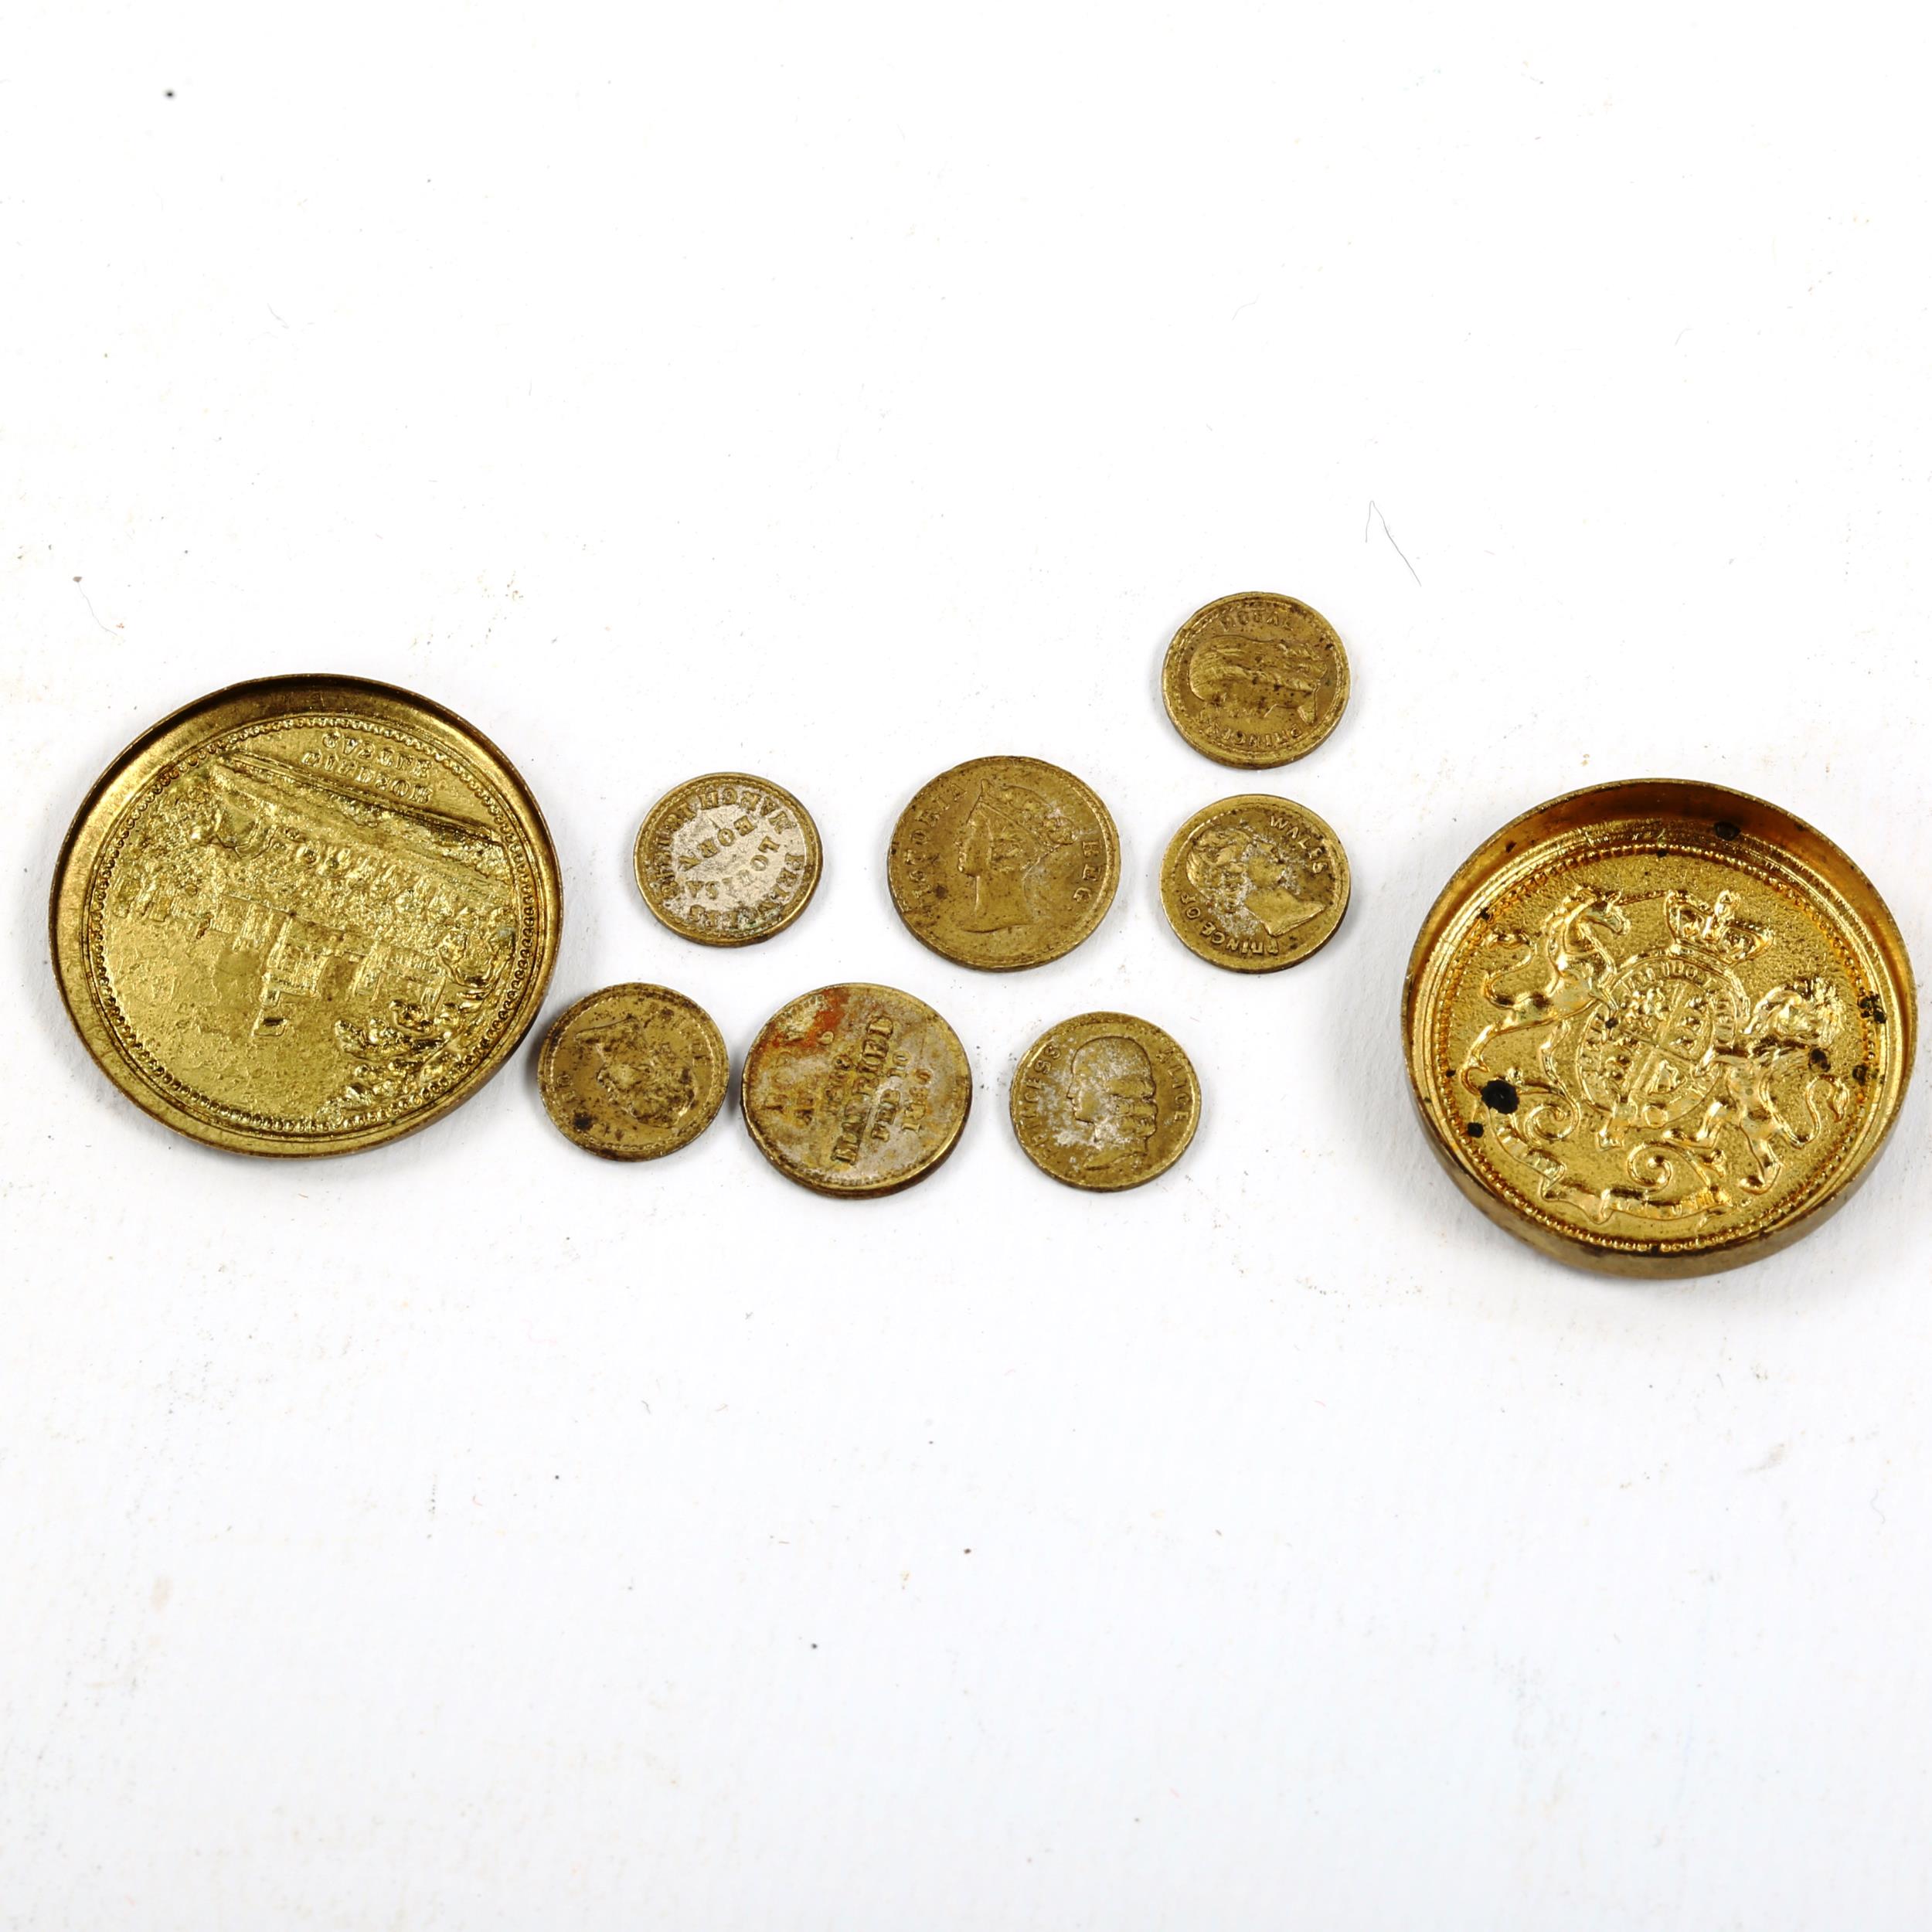 A set of miniature souvenir coins depicting Queen Victoria and her children, in original gilt- - Image 3 of 3